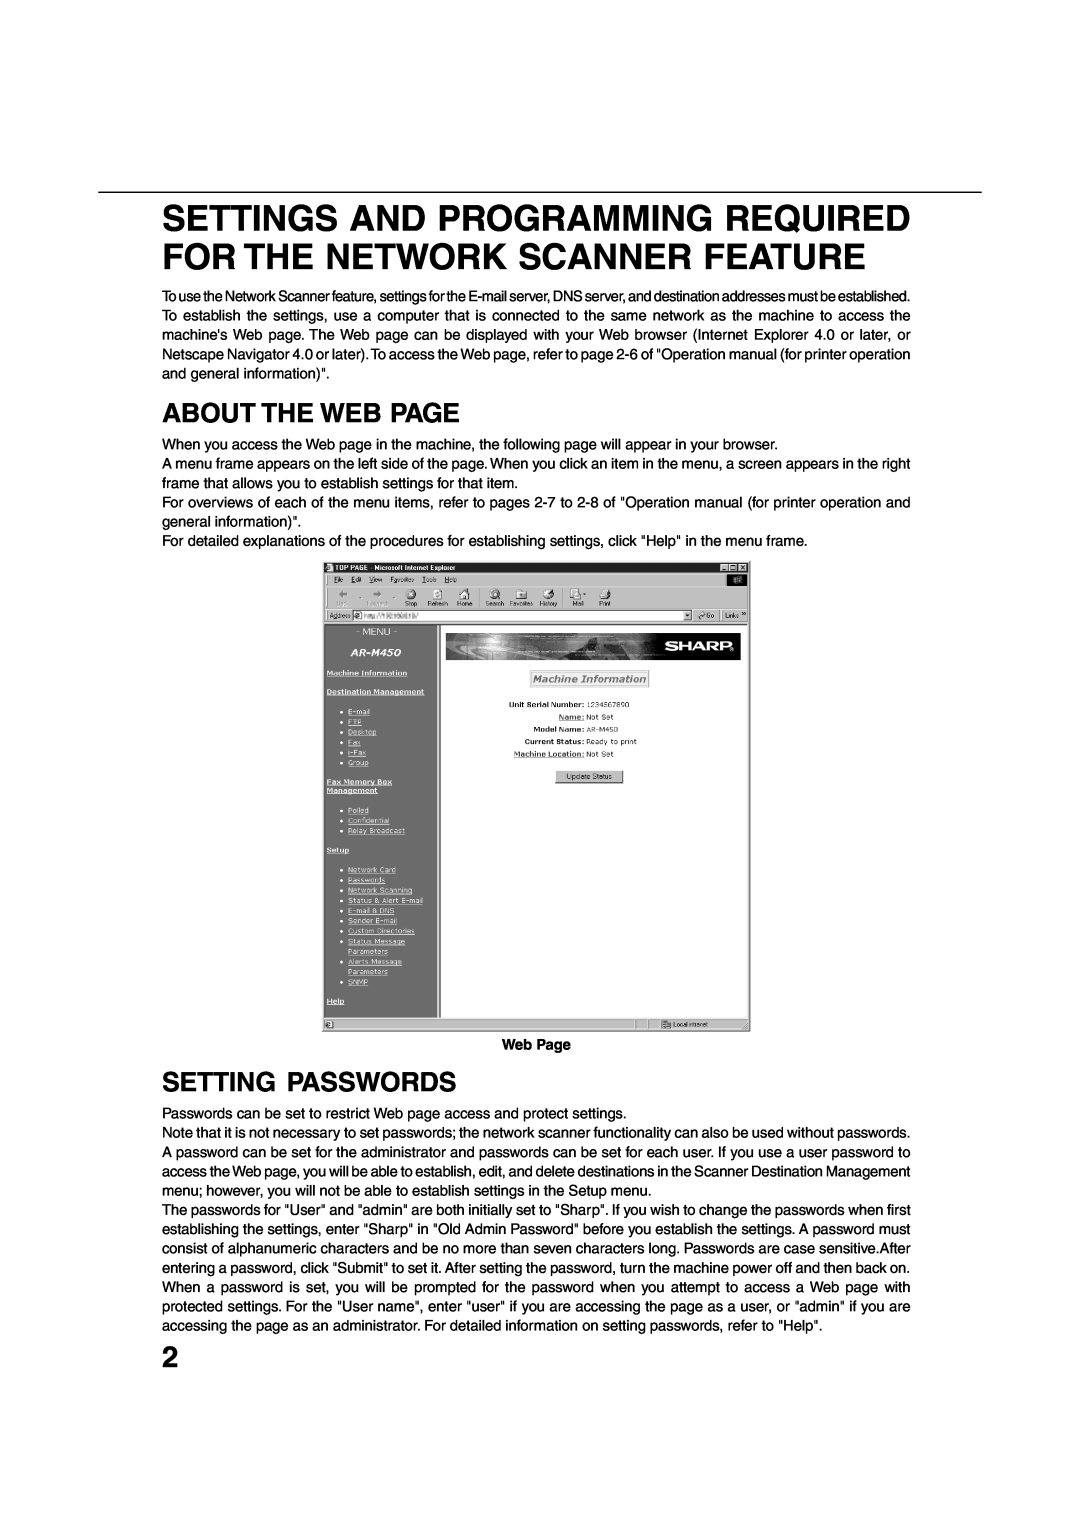 Sharp 350M, 4500 Settings And Programming Required For The Network Scanner Feature, About The Web Page, Setting Passwords 